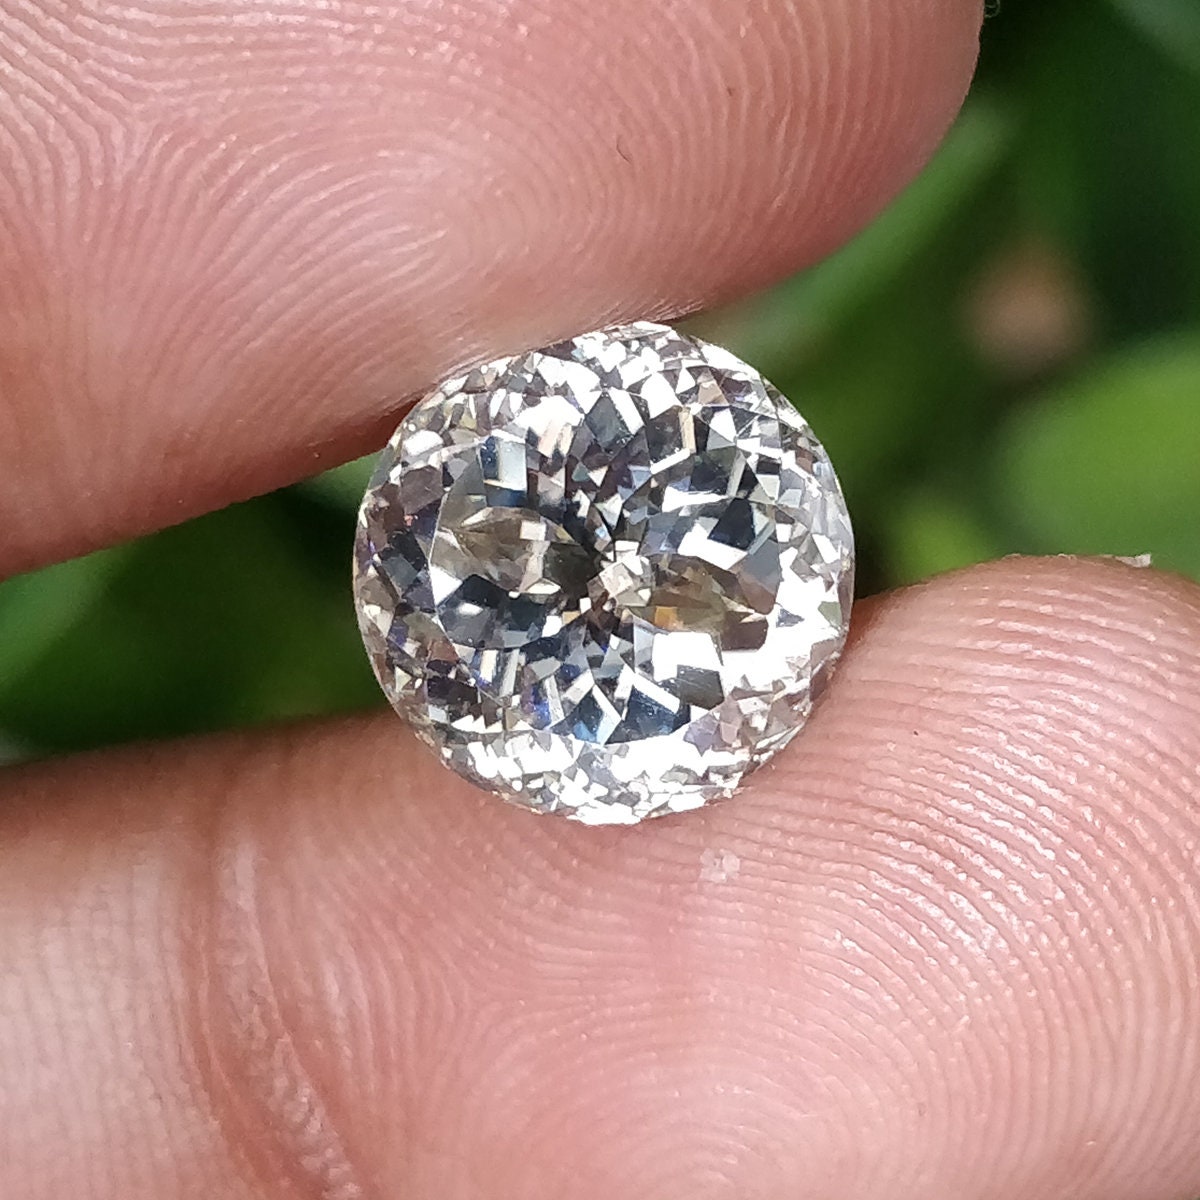 5.02 CT Heritage Portuguese Near-colorless Moissanite Loose | Etsy